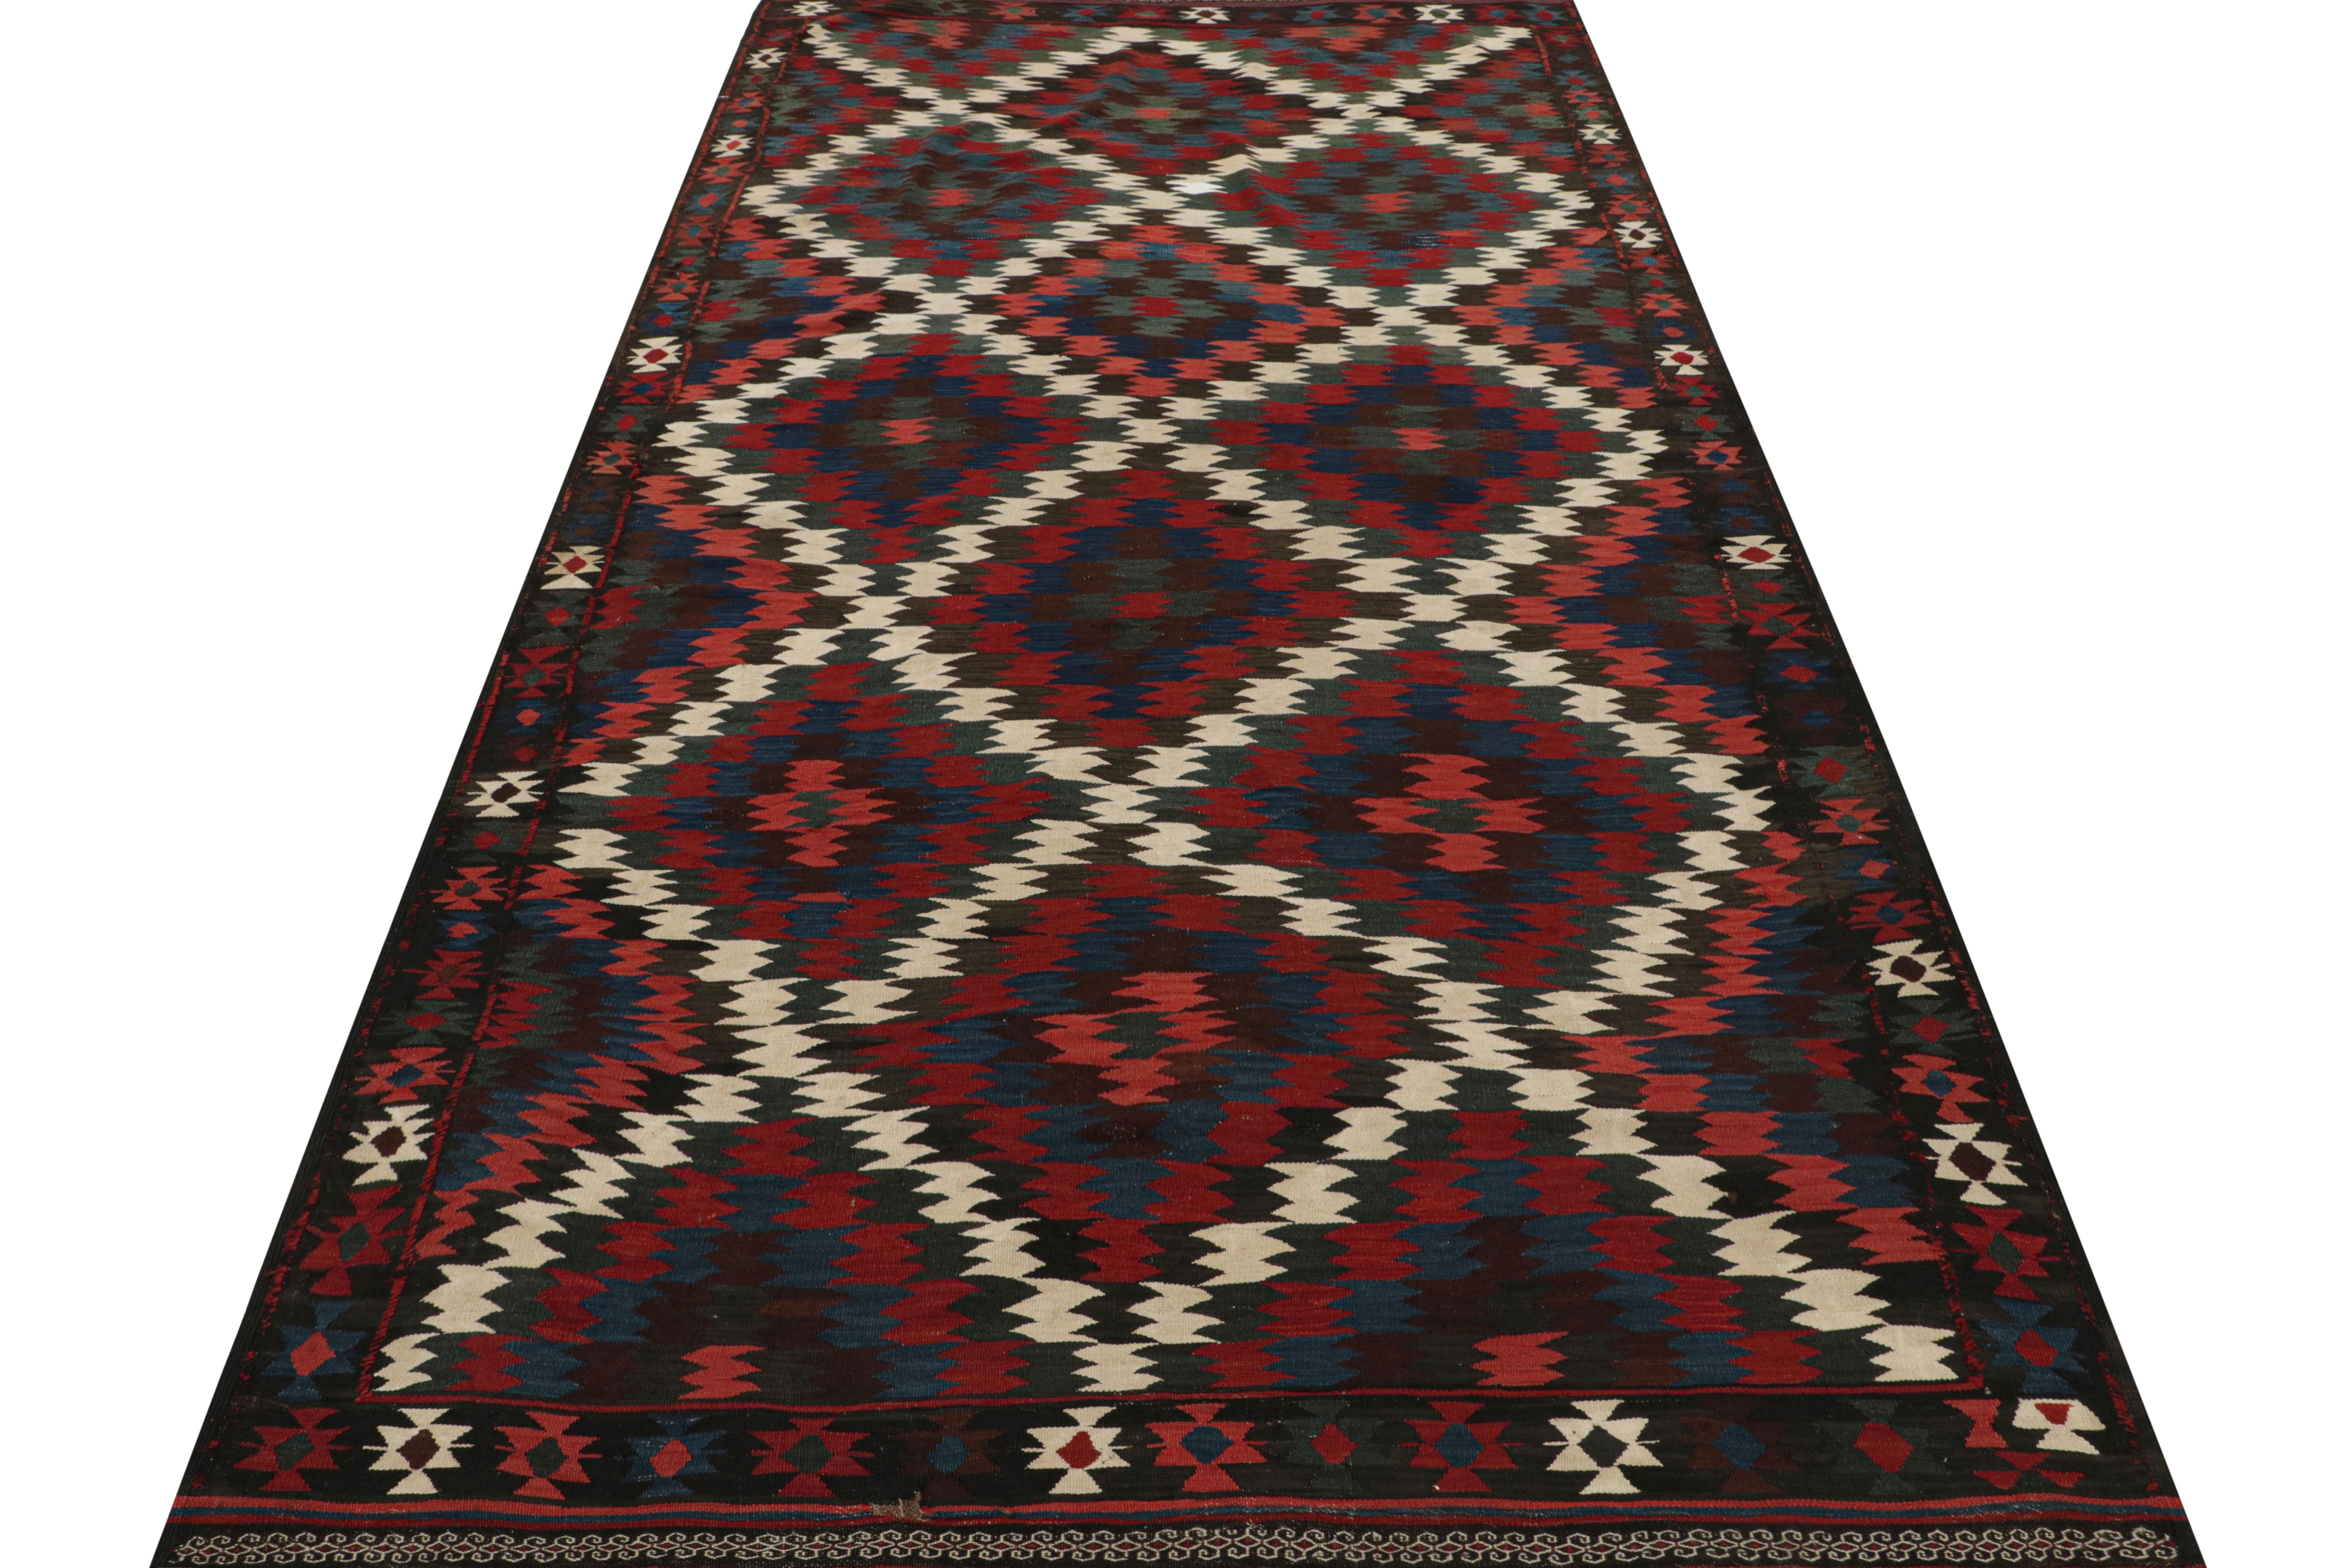 Turkish Vintage Kilim with Red, Teal and Blue Geometric Patterns, from Rug & Kilim  For Sale